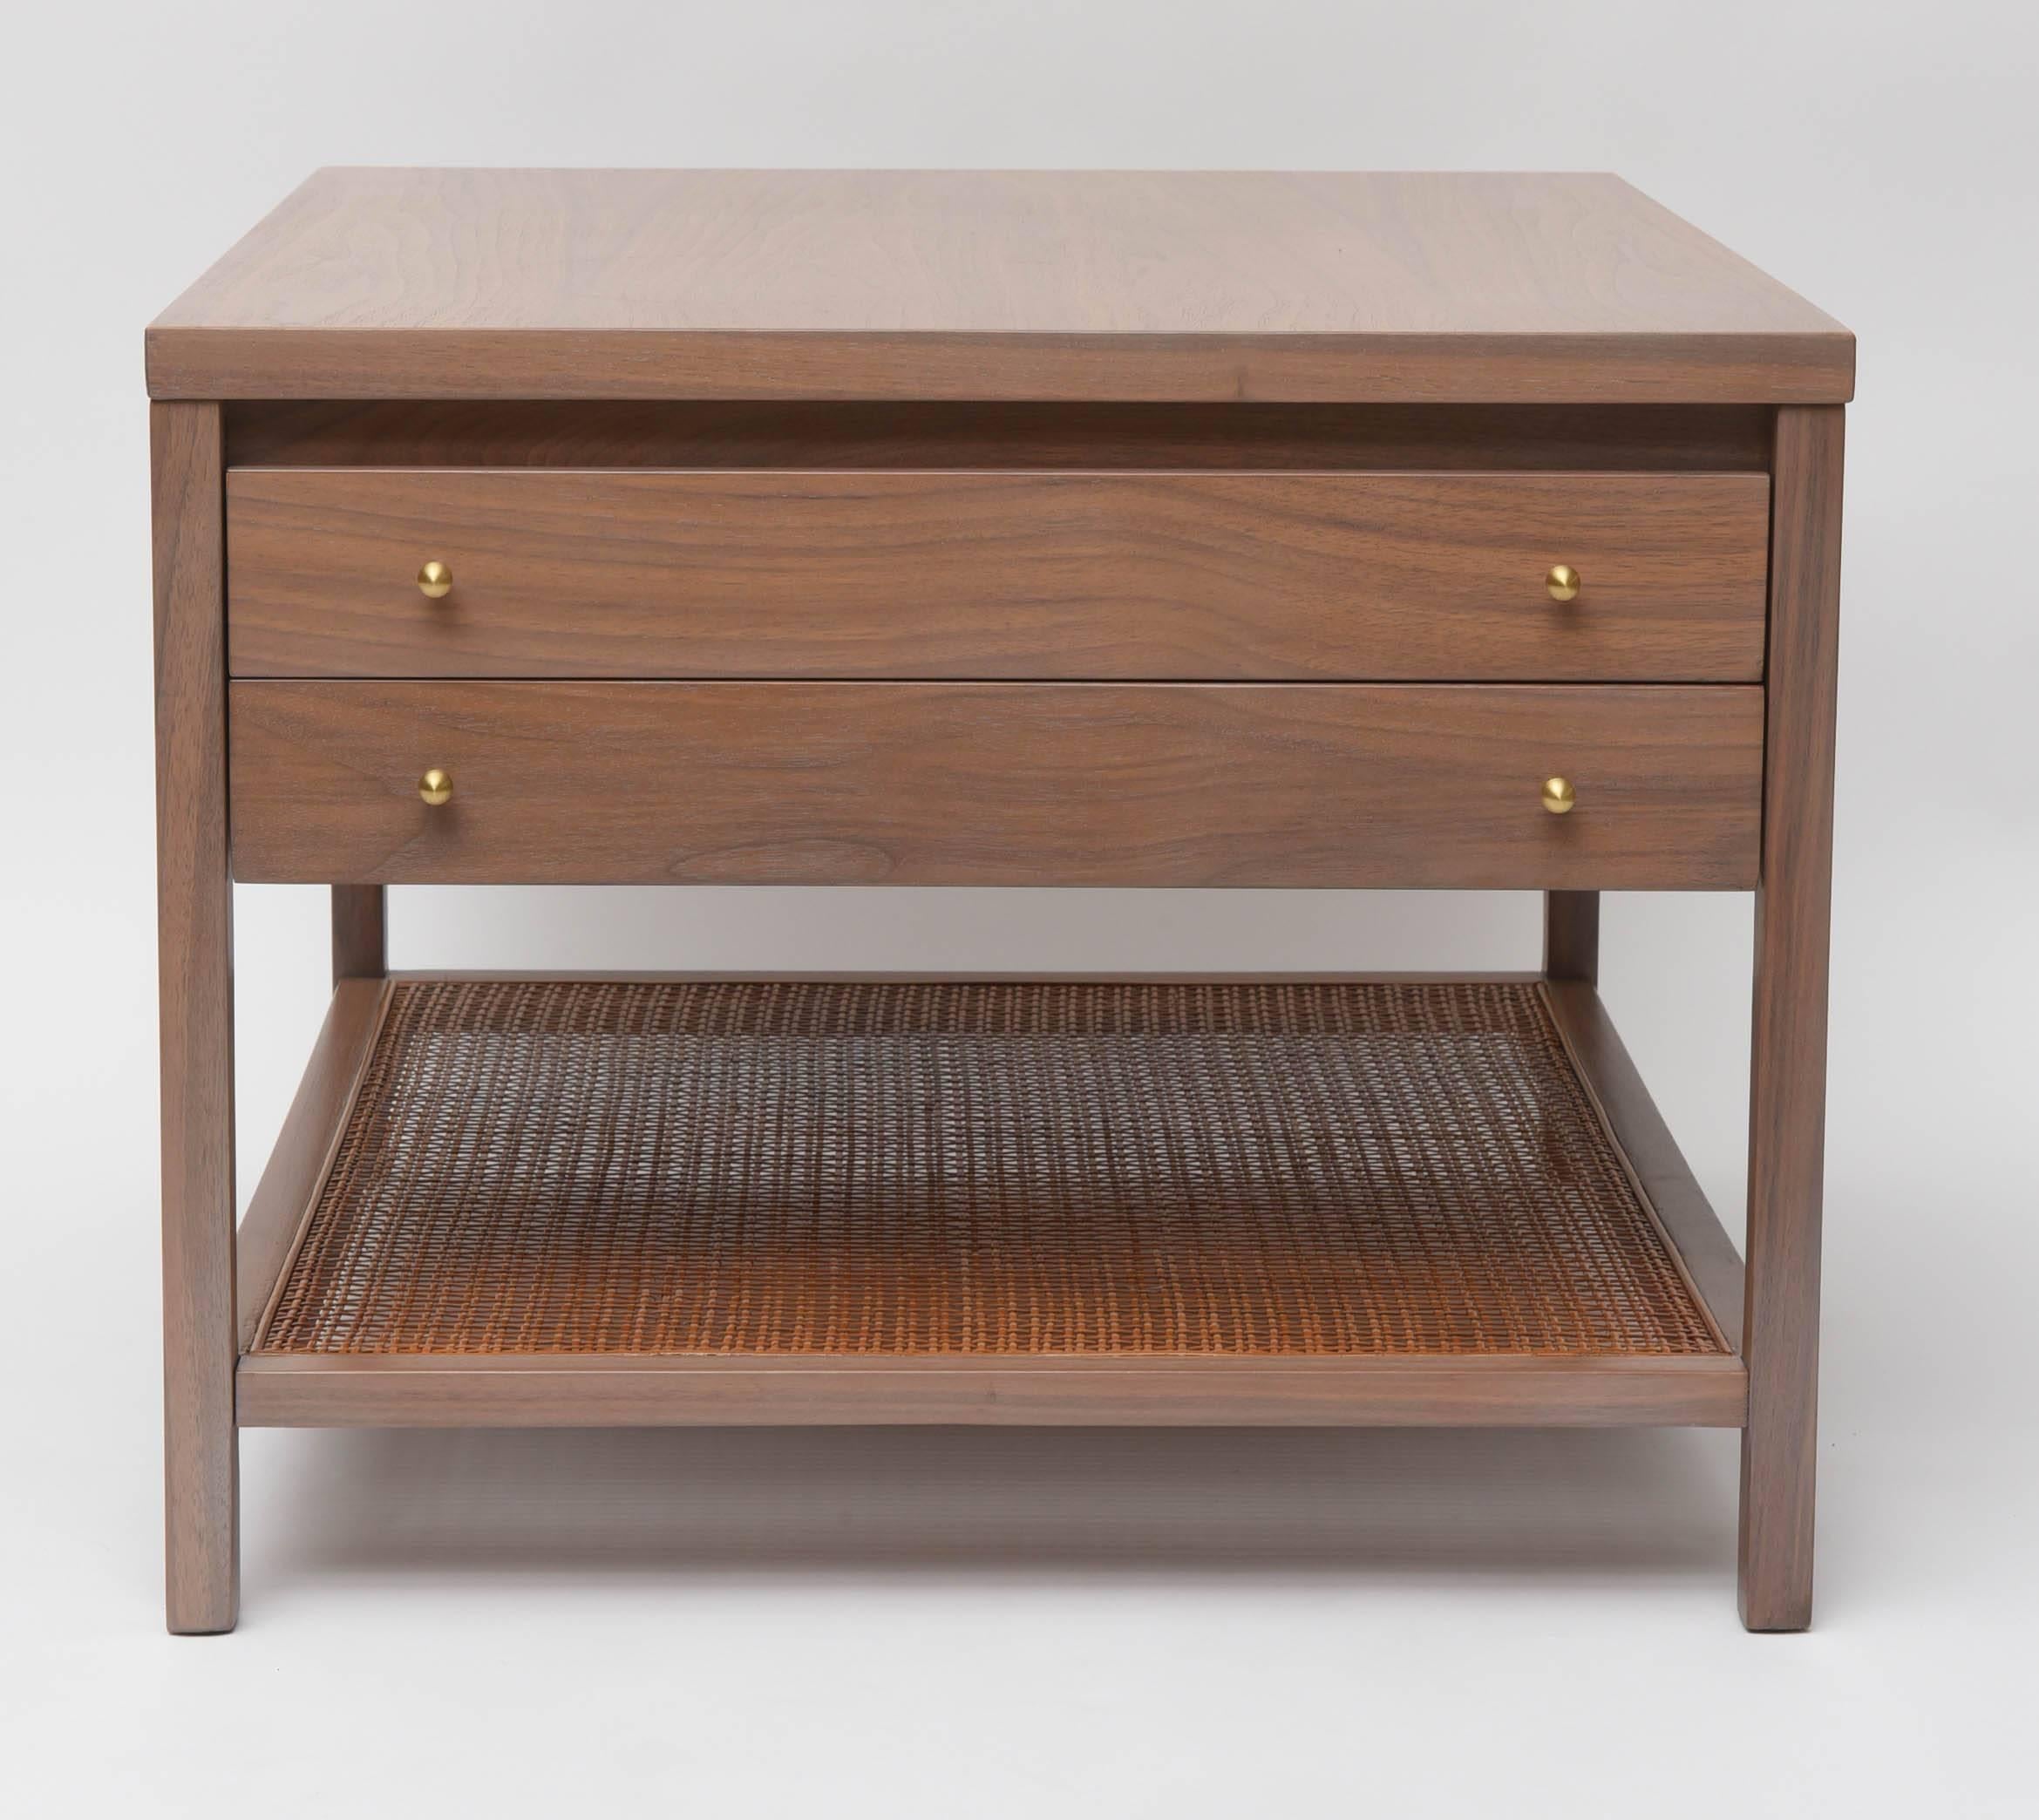 Large 1950s grey washed walnut side table by Paul McCobb for Calvin with woven rattan bottom shelf in its original natural rattan and brushed brass knobs.